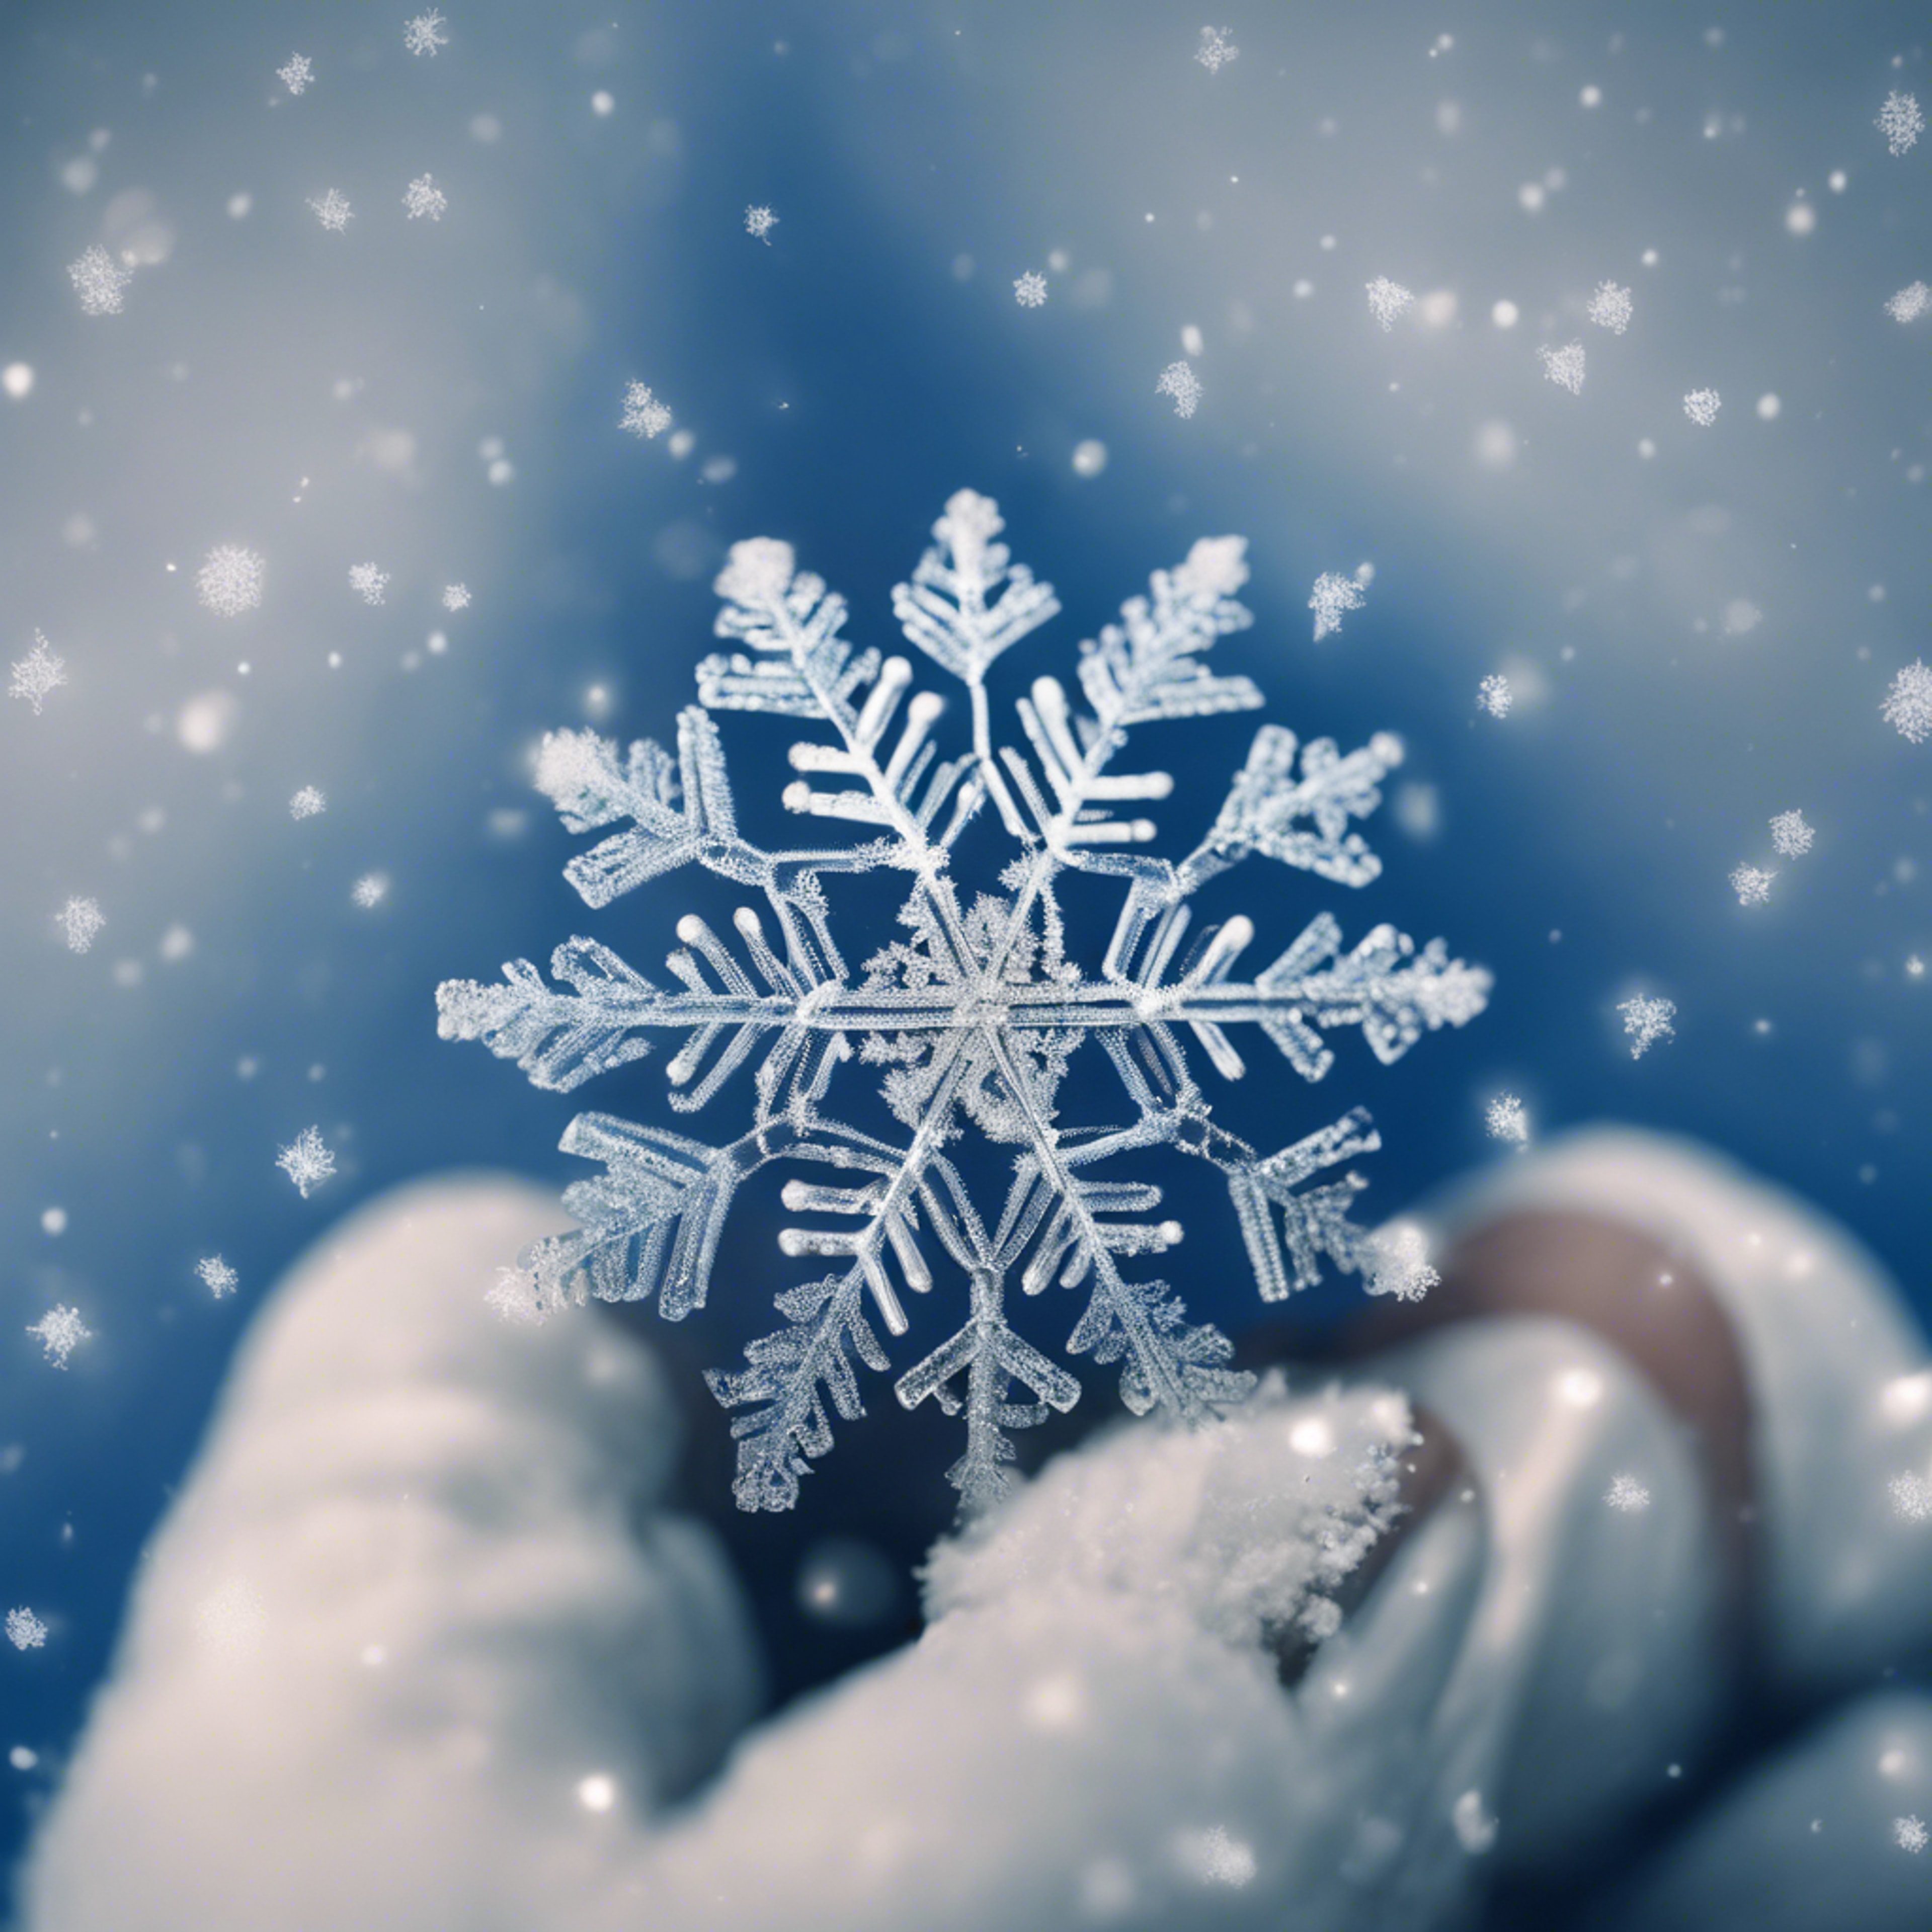 Intricate patterns of a snowflake on a blue gloved finger. Tapeta[6c7ed0f3c74b413e9833]